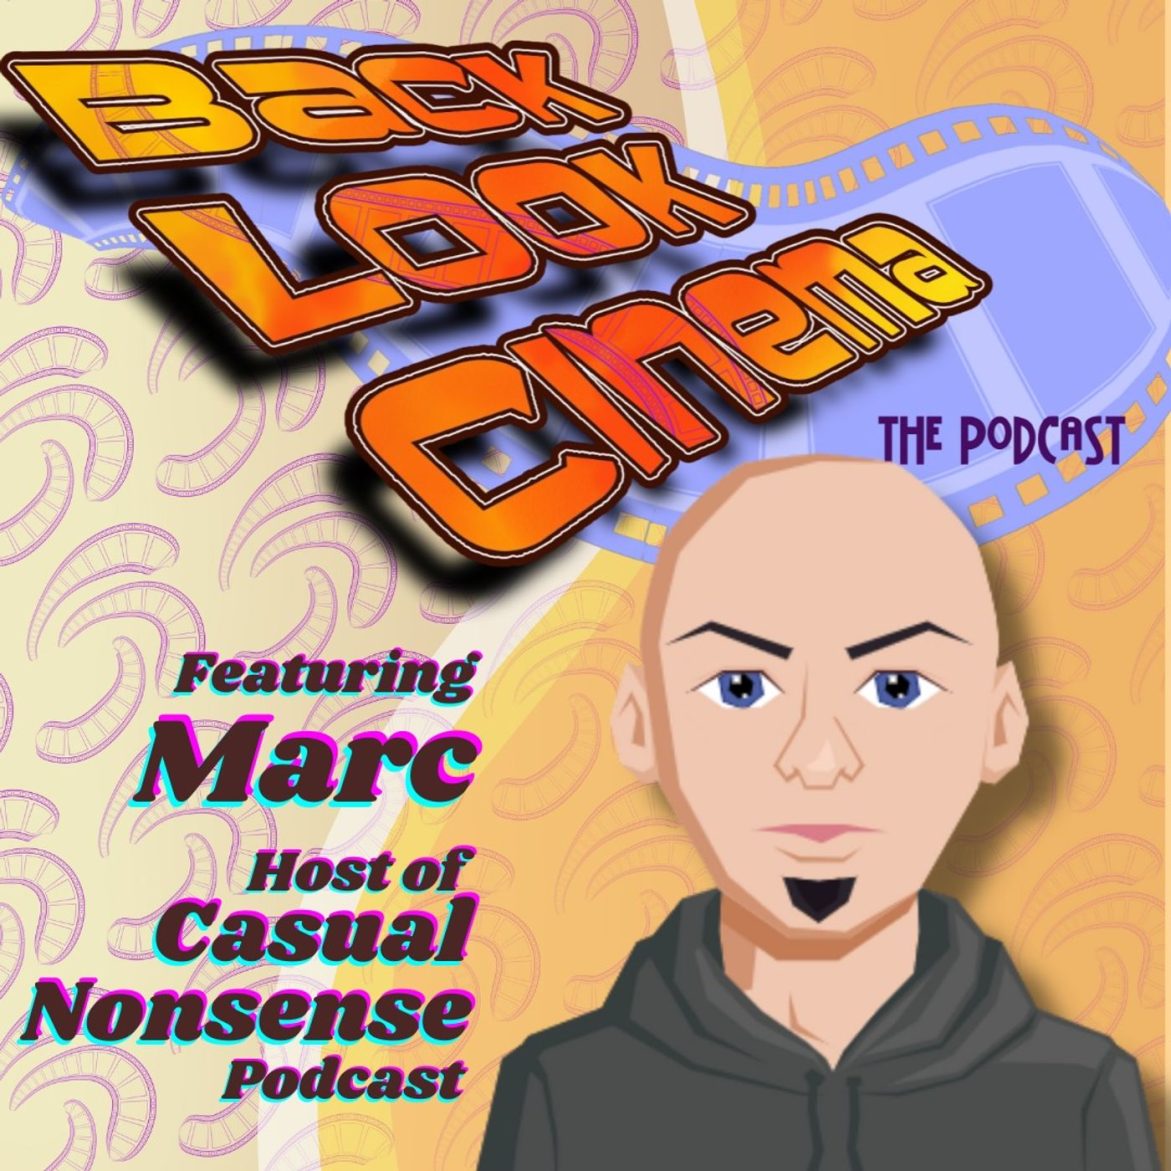 Black Podcasting - Ep. 116: The Last Boy Scout (Featuring Marc from Casual Nonsense)